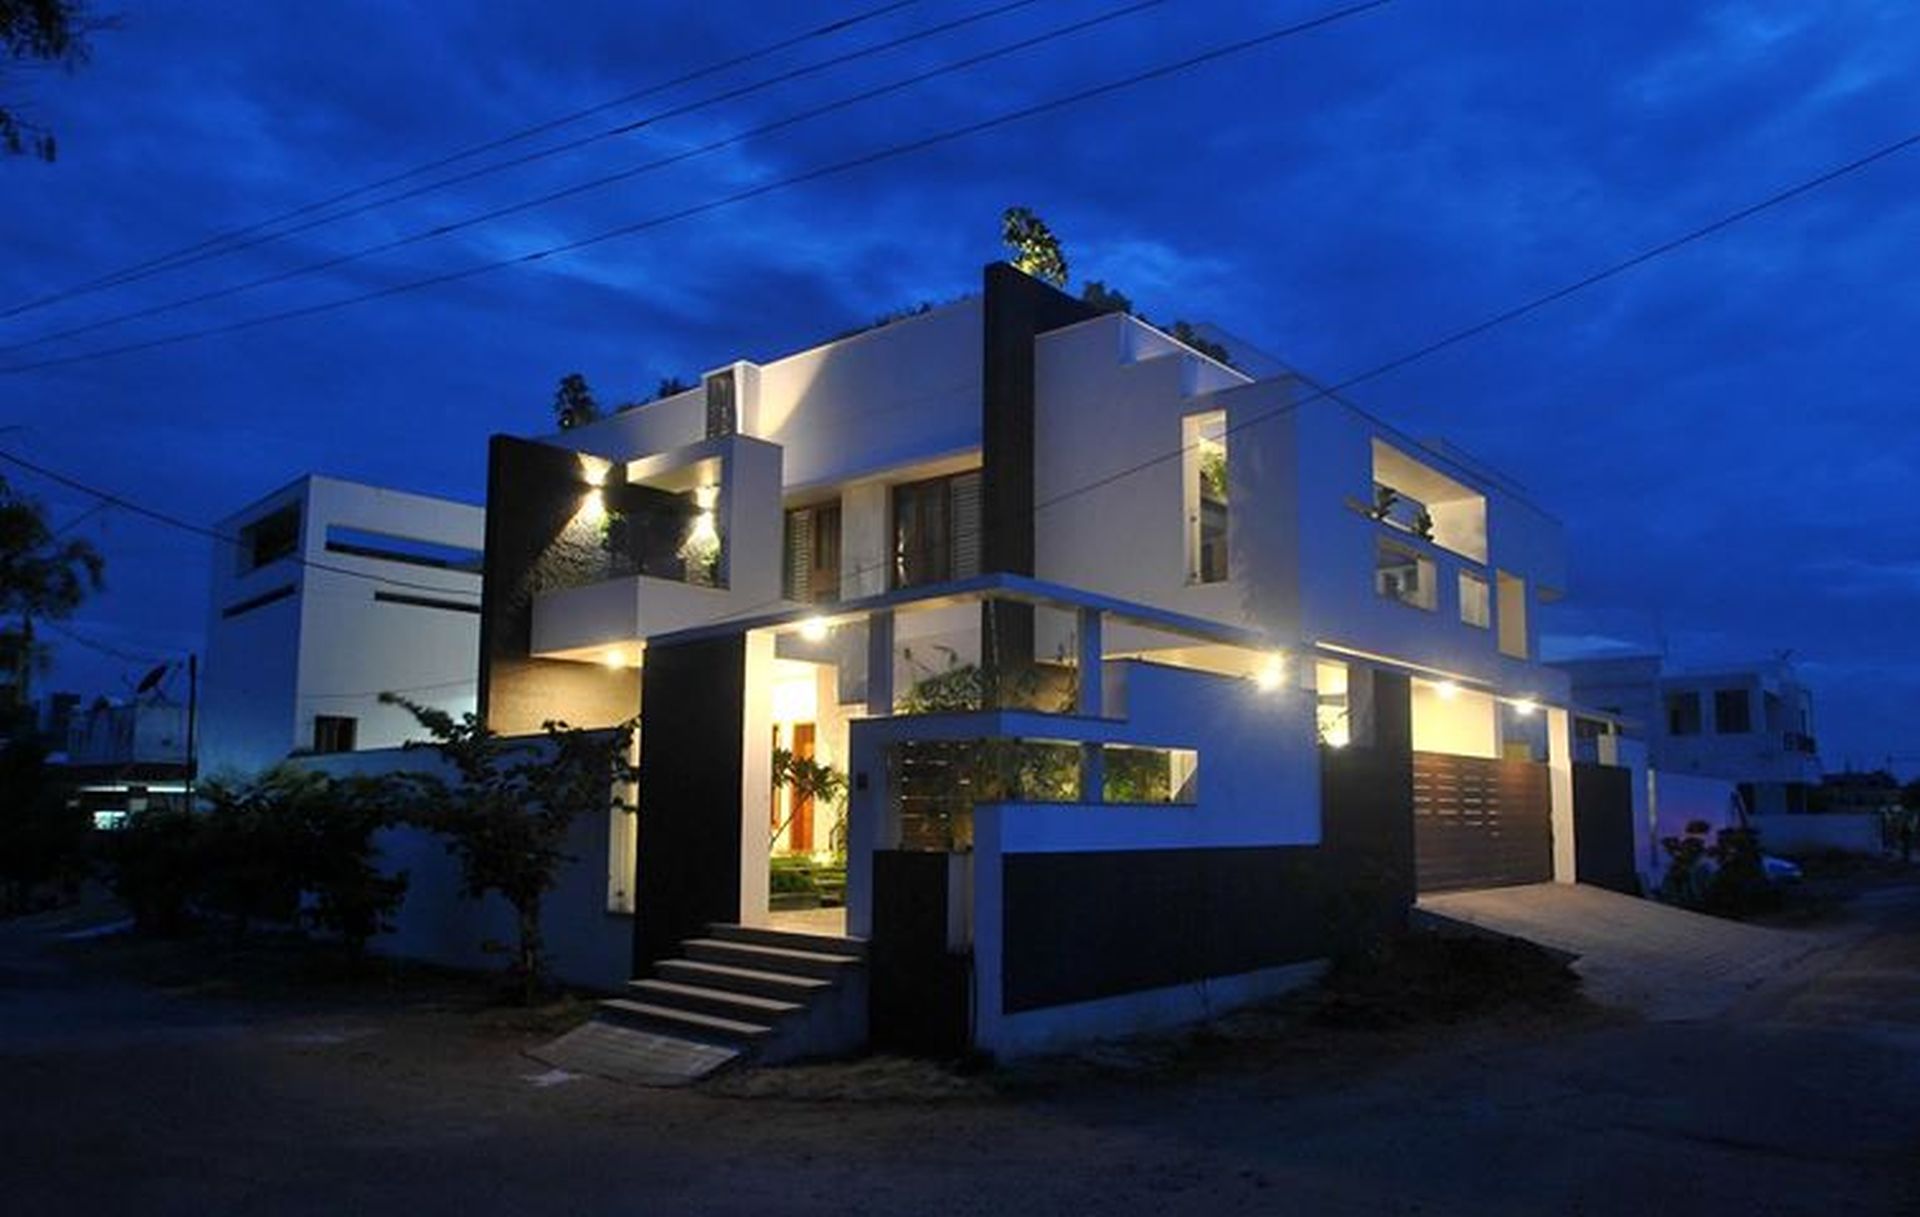 Mr & Mrs Pannerselvam's Residence at Erode by Murali Architects